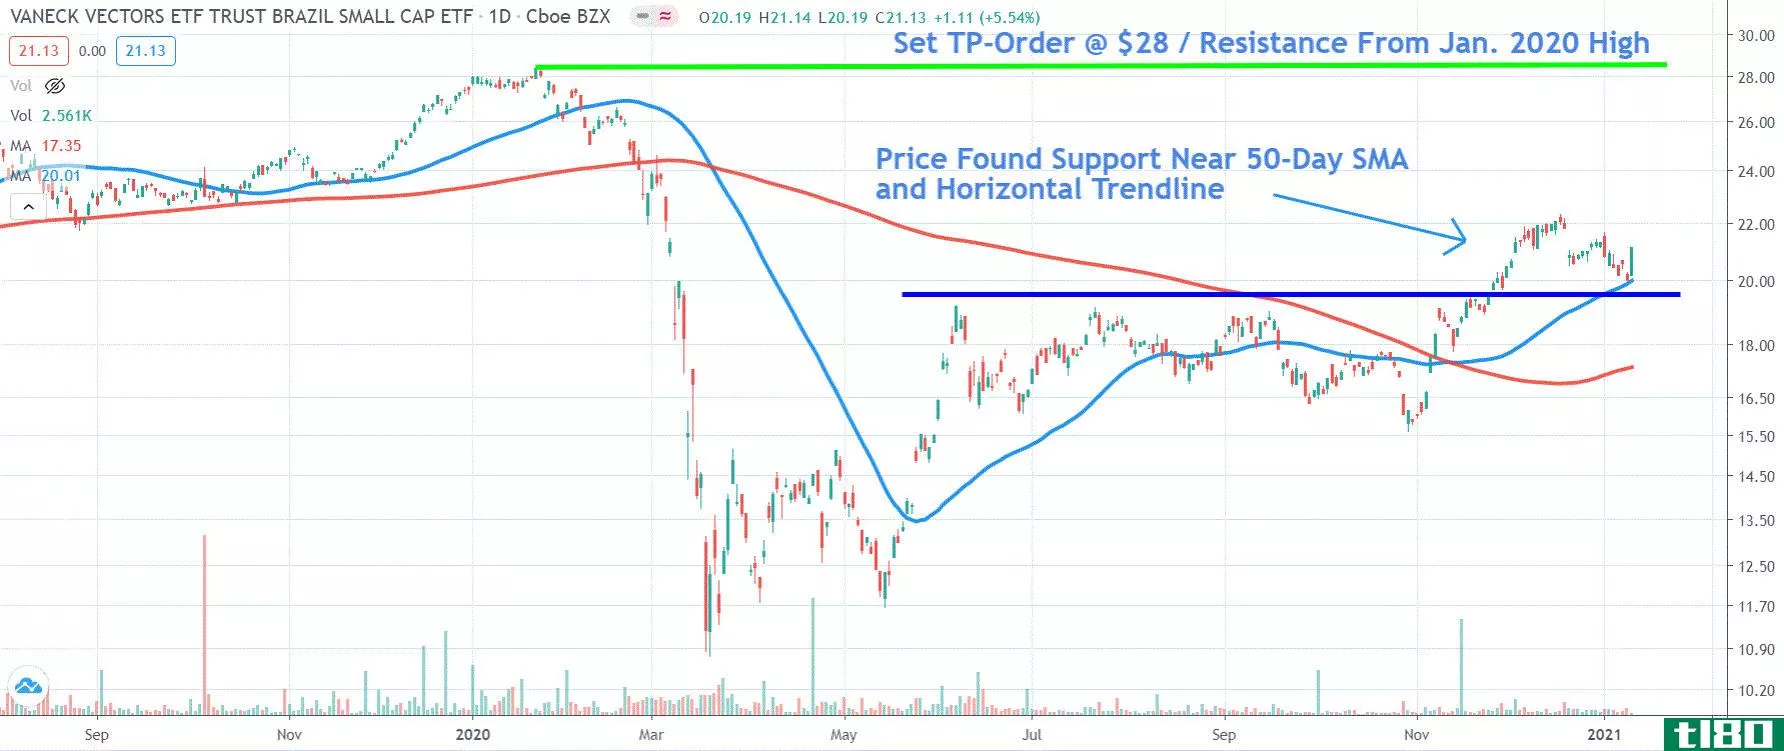 Chart depicting the share price of the VanEck Vectors Brazil Small-Cap ETF (BRF)